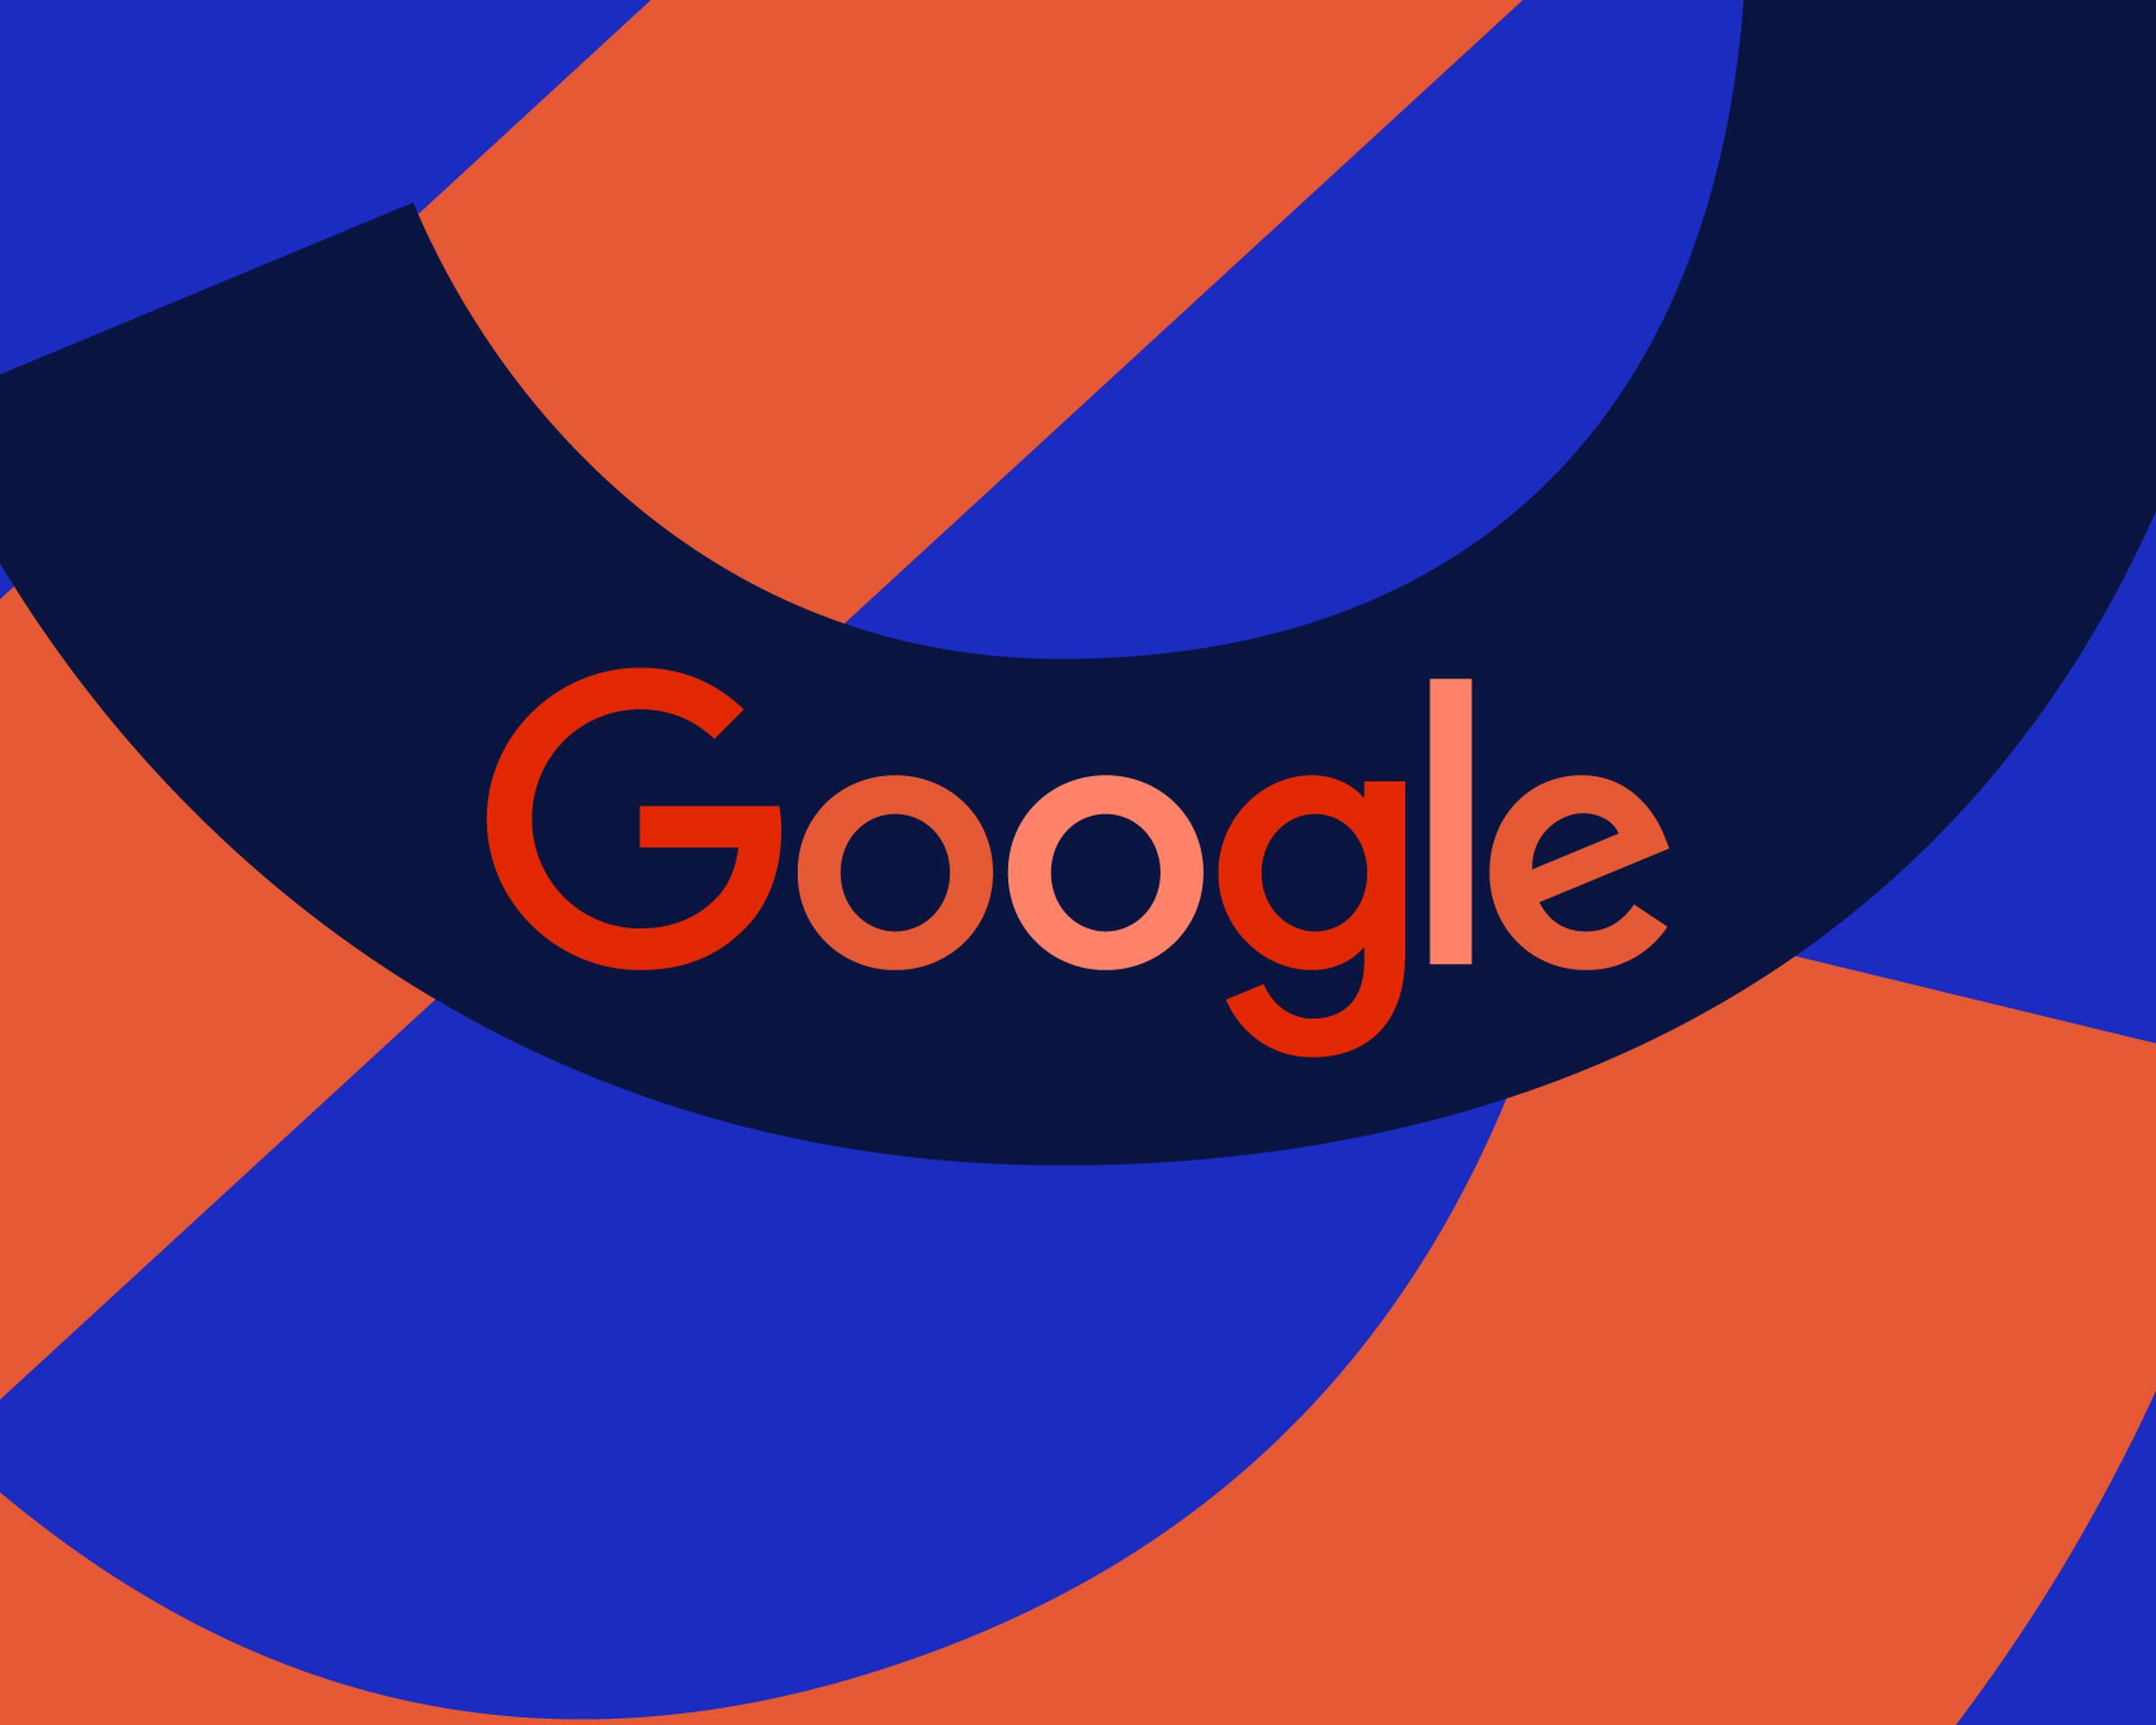 Illustration of Google’s wordmark, written in red and pink on a dark blue background.